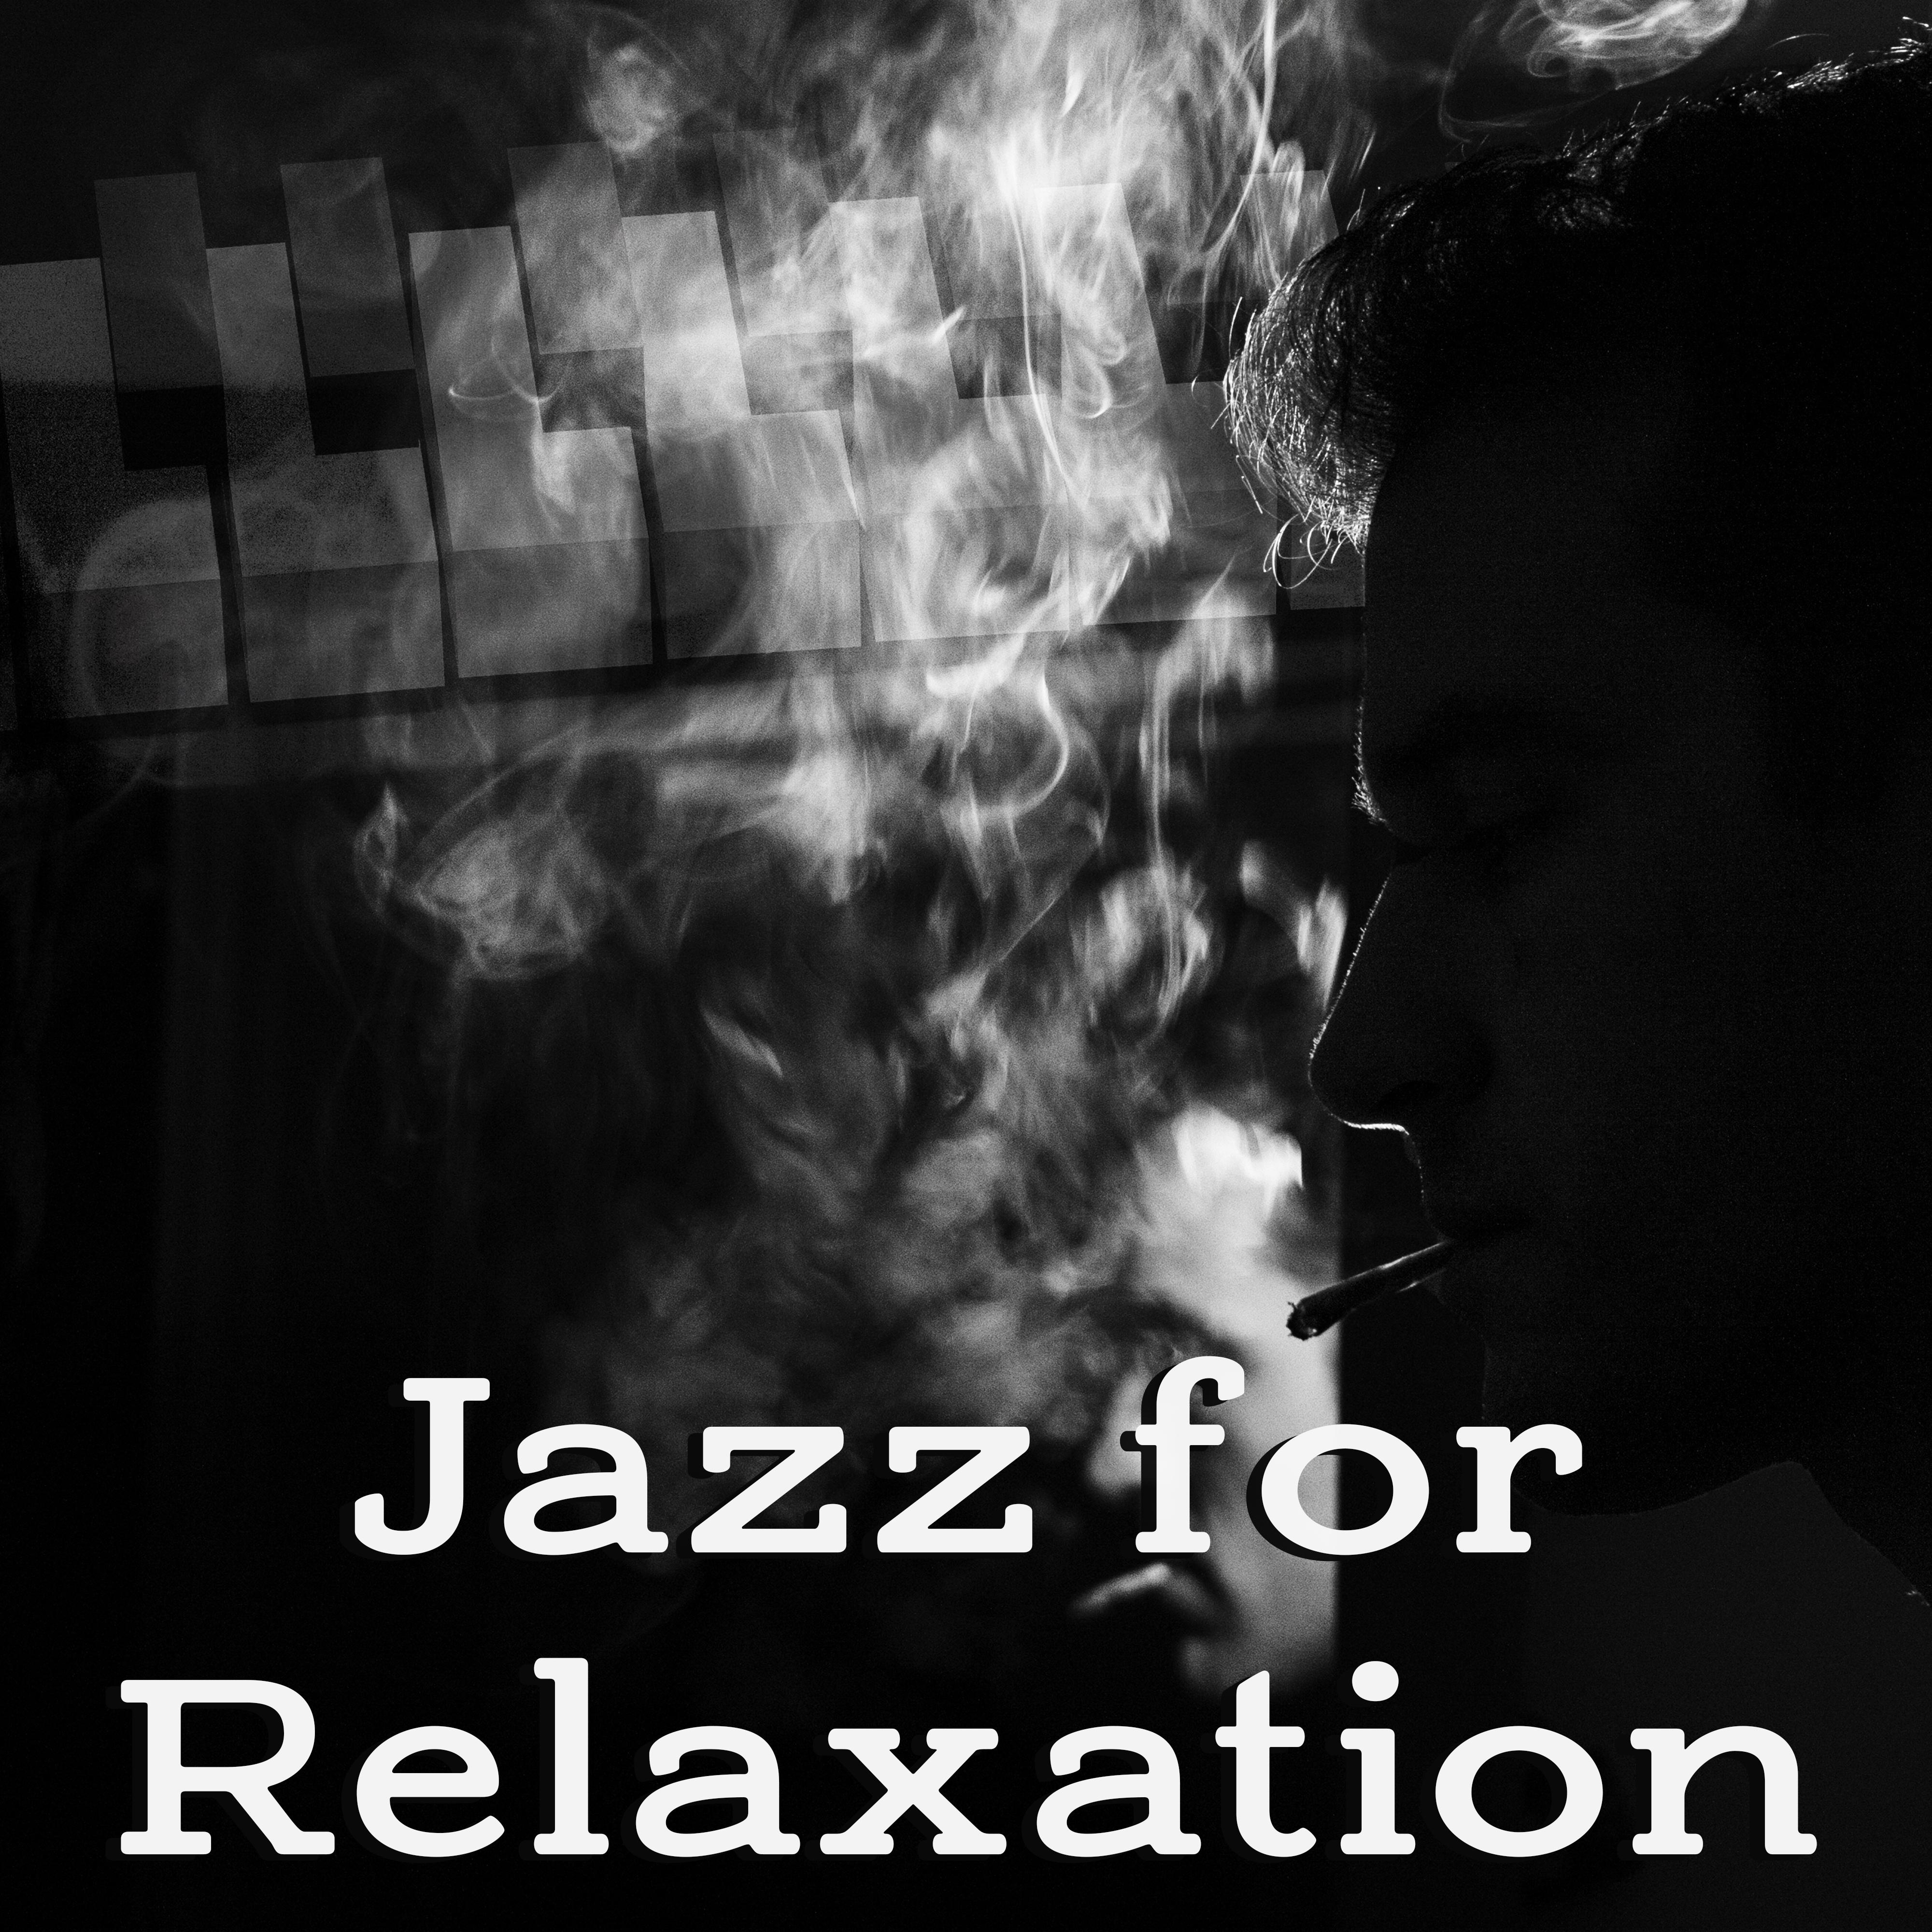 Jazz for Relaxation  Pure Mind, Chilled Jazz, Cafe Music, Restaurant Songs, Gentle Piano, Jazz Night Club, Cocktail Party, Mellow Jazz